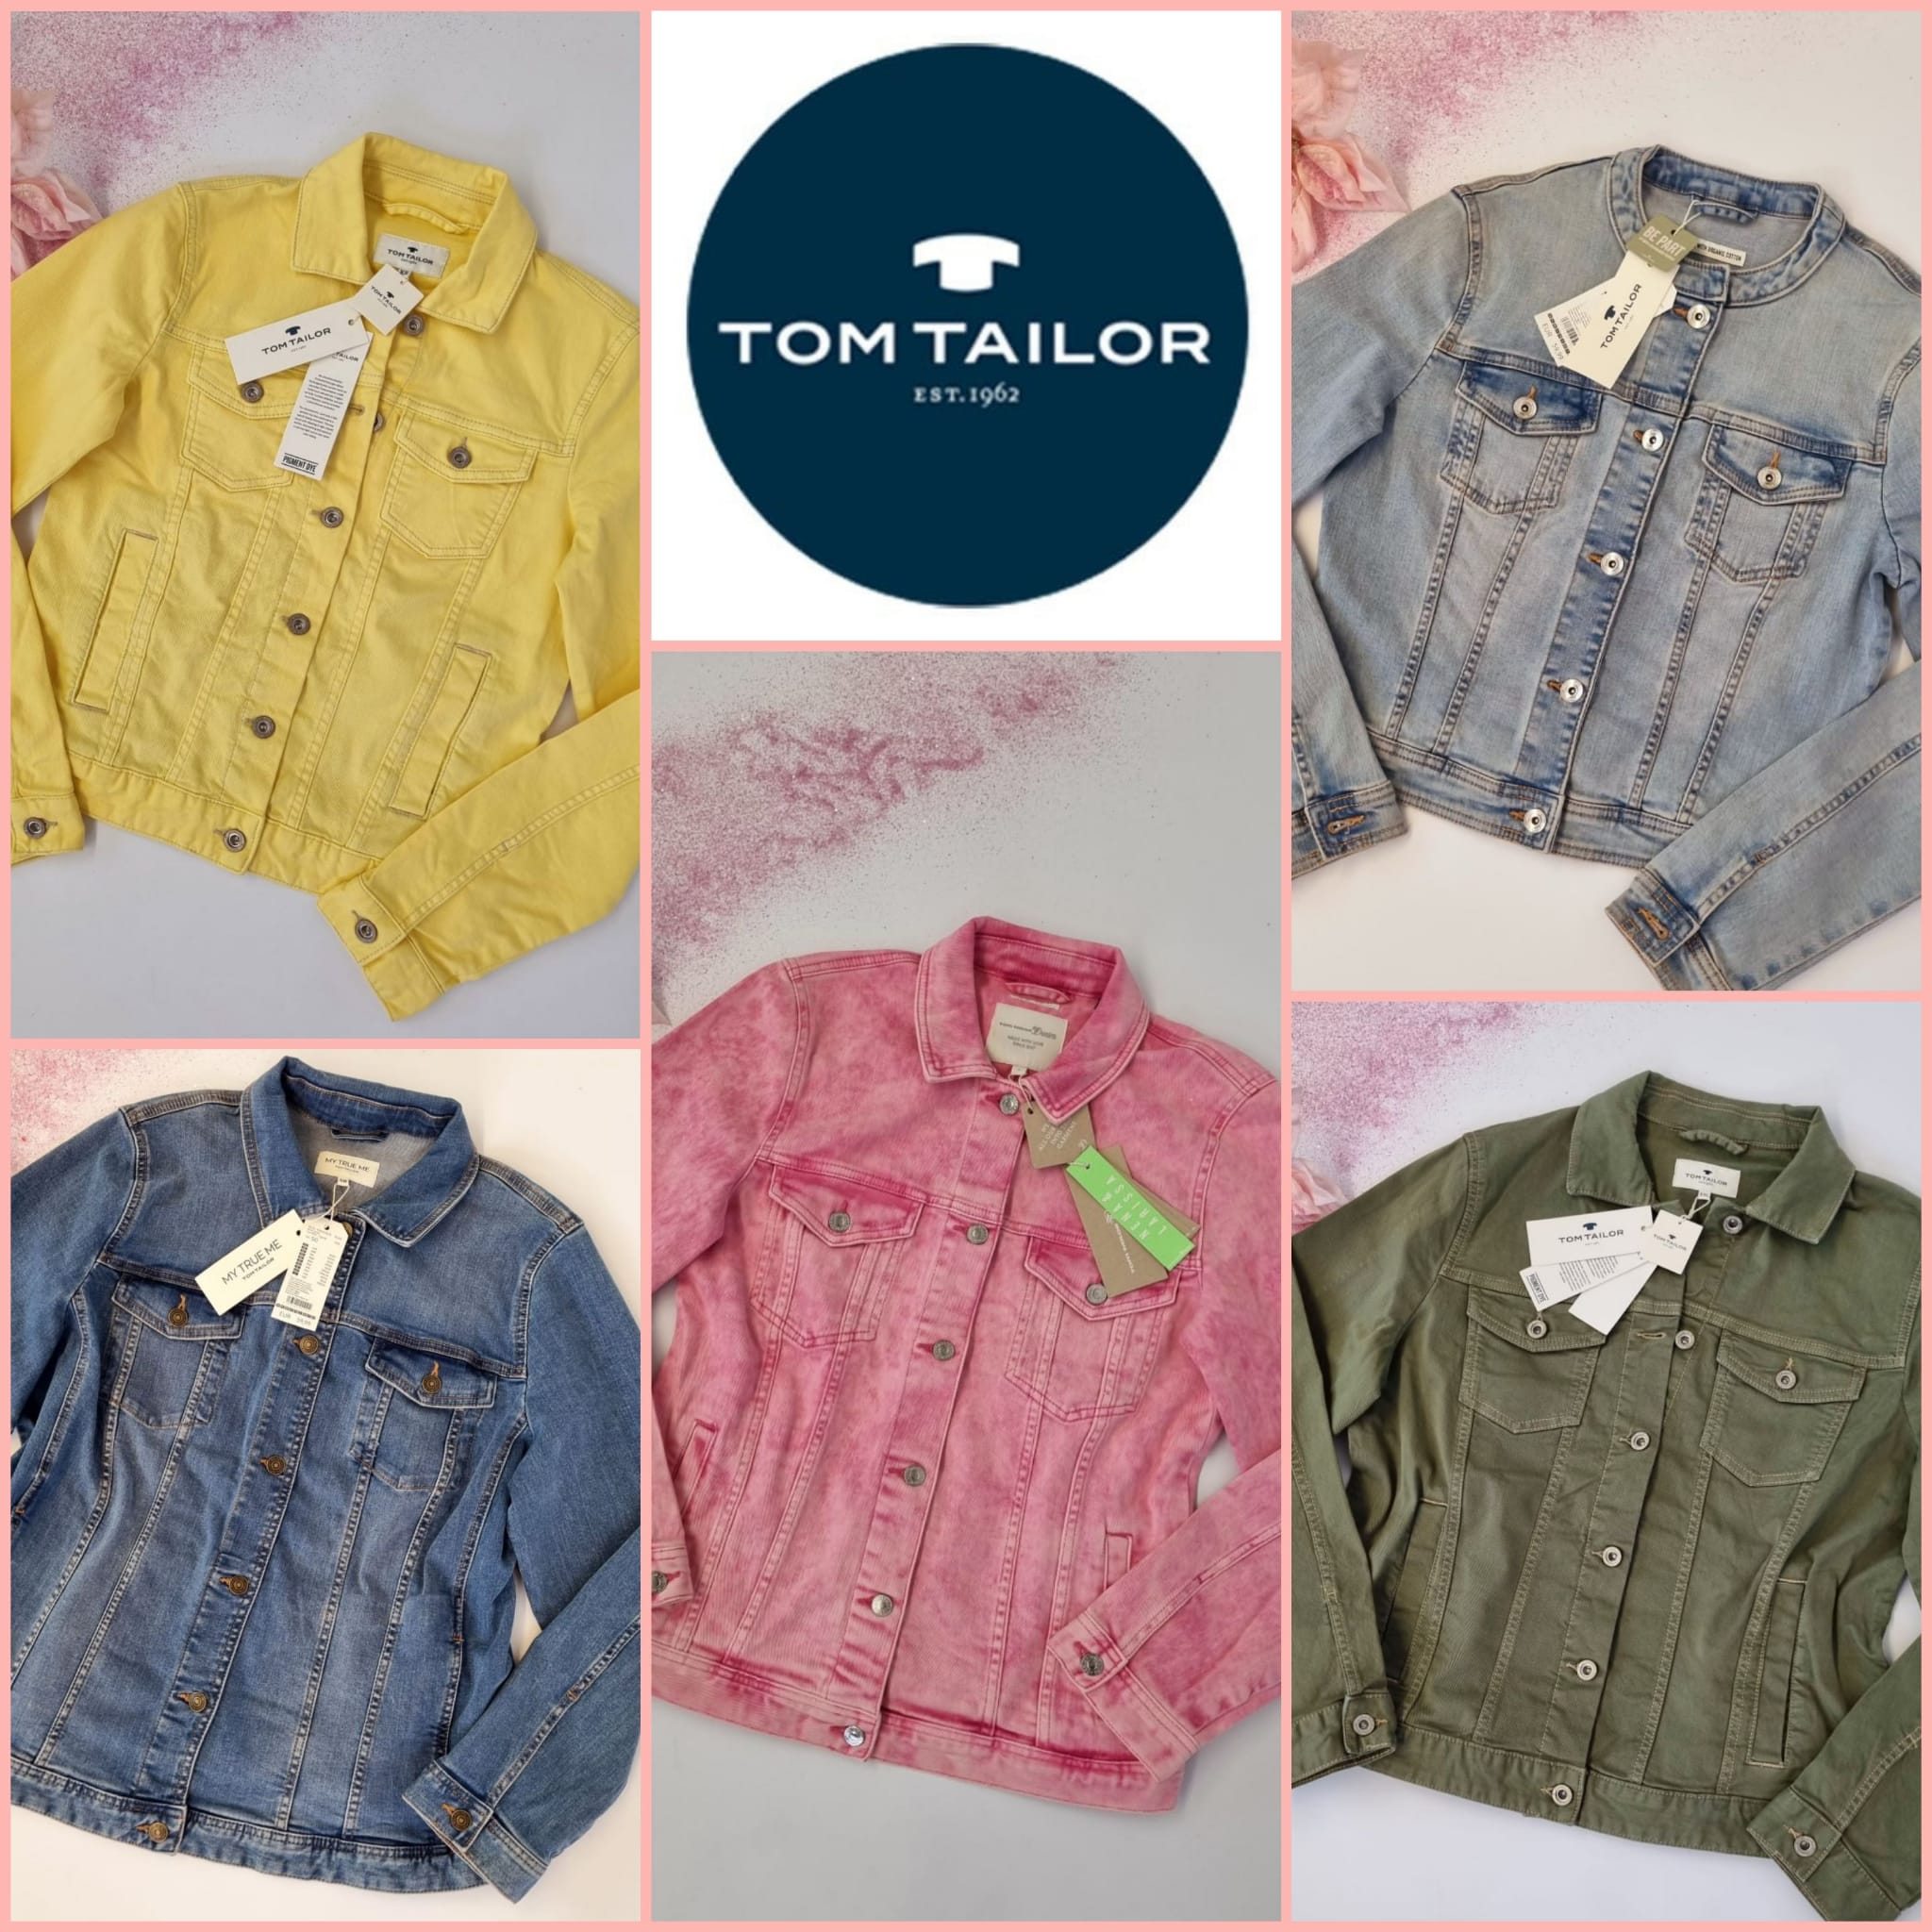 Ladies Jeans Jackets by Tom Tailor